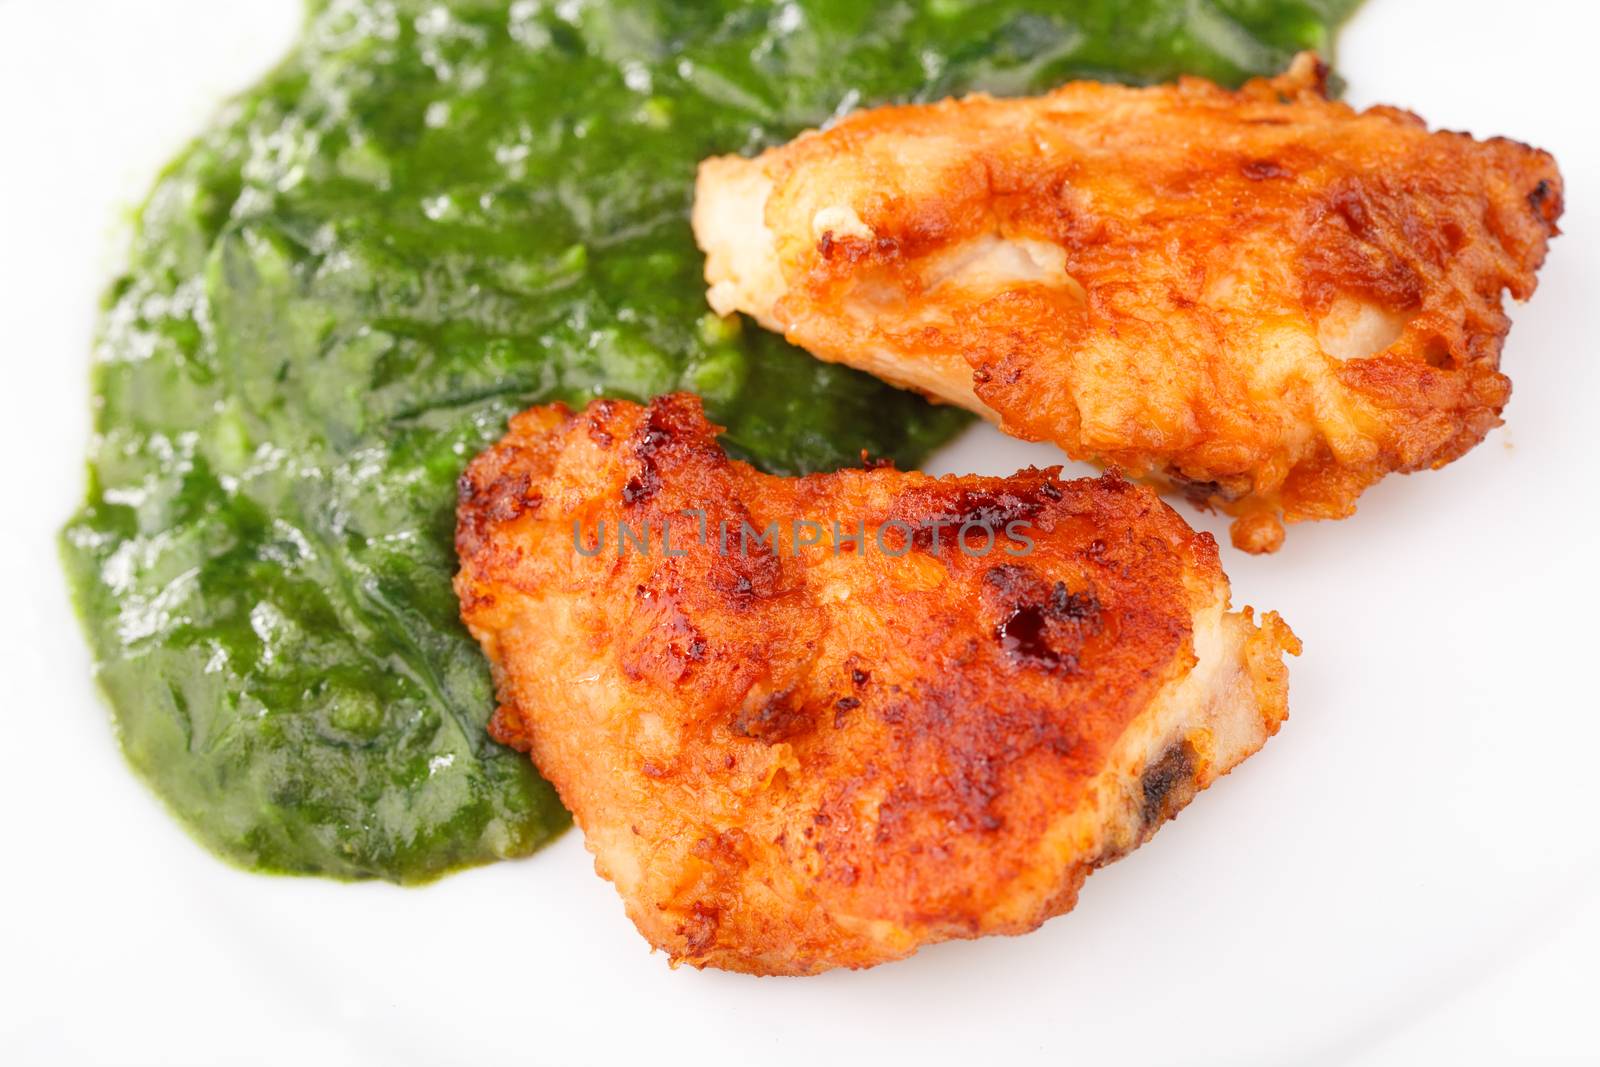 Fried Chicken Strips with spinach by MilanMarkovic78